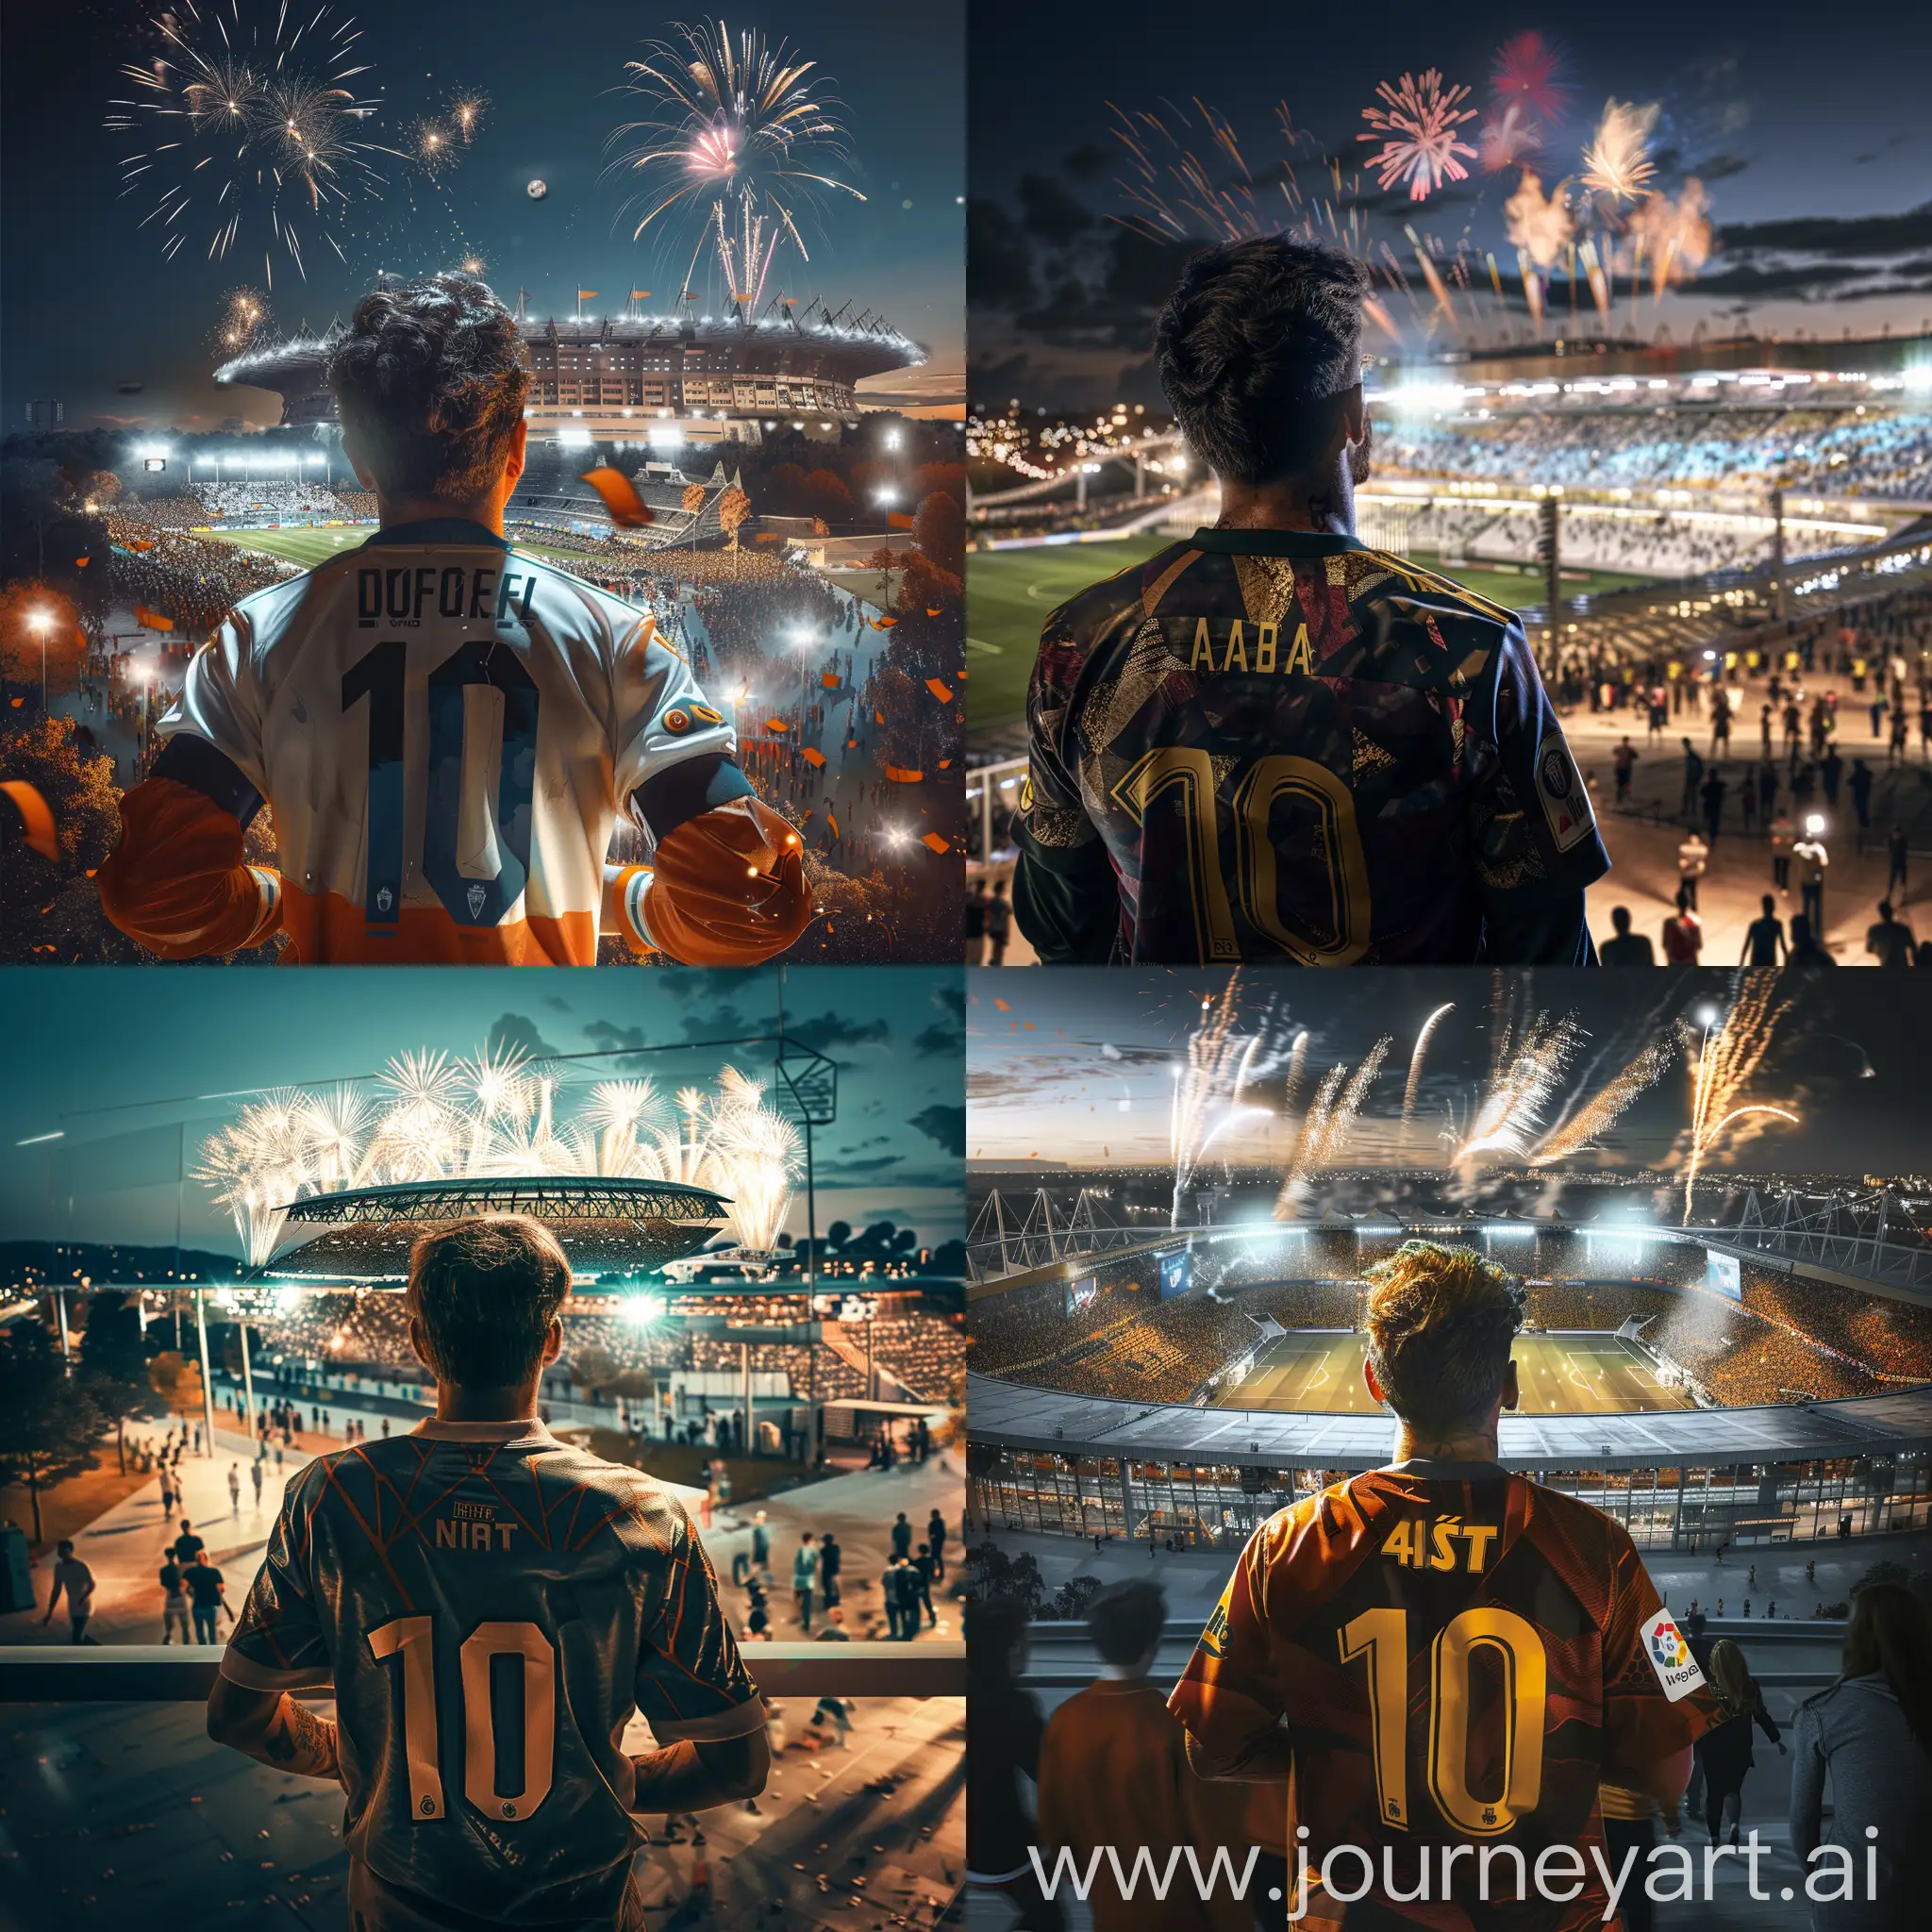 Passionate-Football-Fan-in-Number-10-Jersey-Excitedly-Gazing-at-Stadium-with-Lively-Fans-and-Fireworks